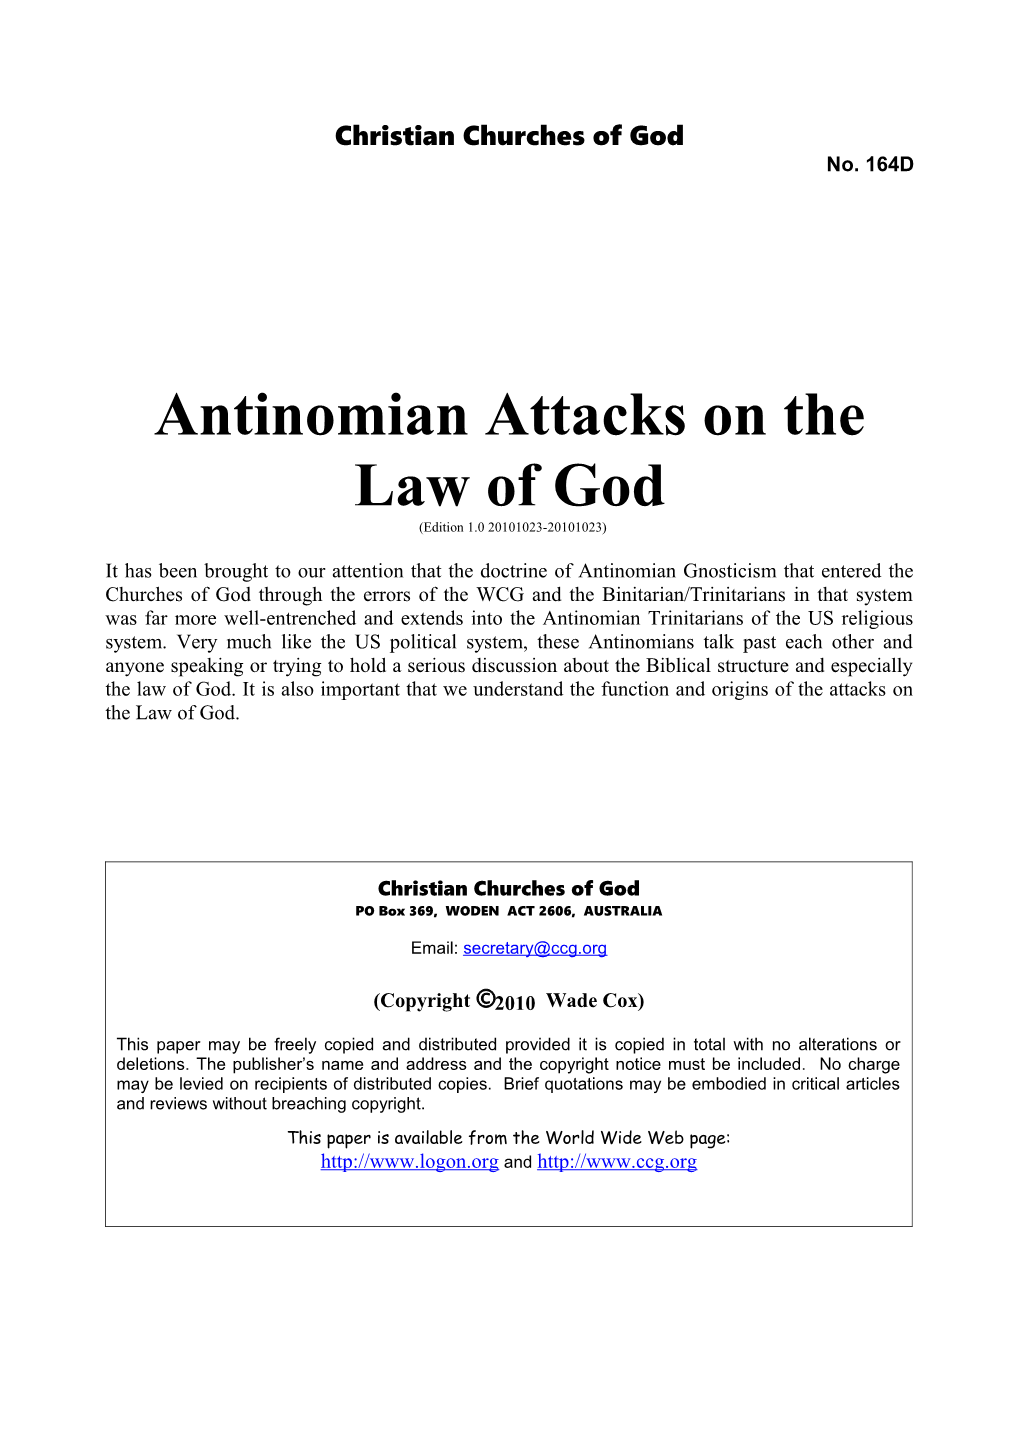 Antinomian Attacks on the Law of God (No. 164D)